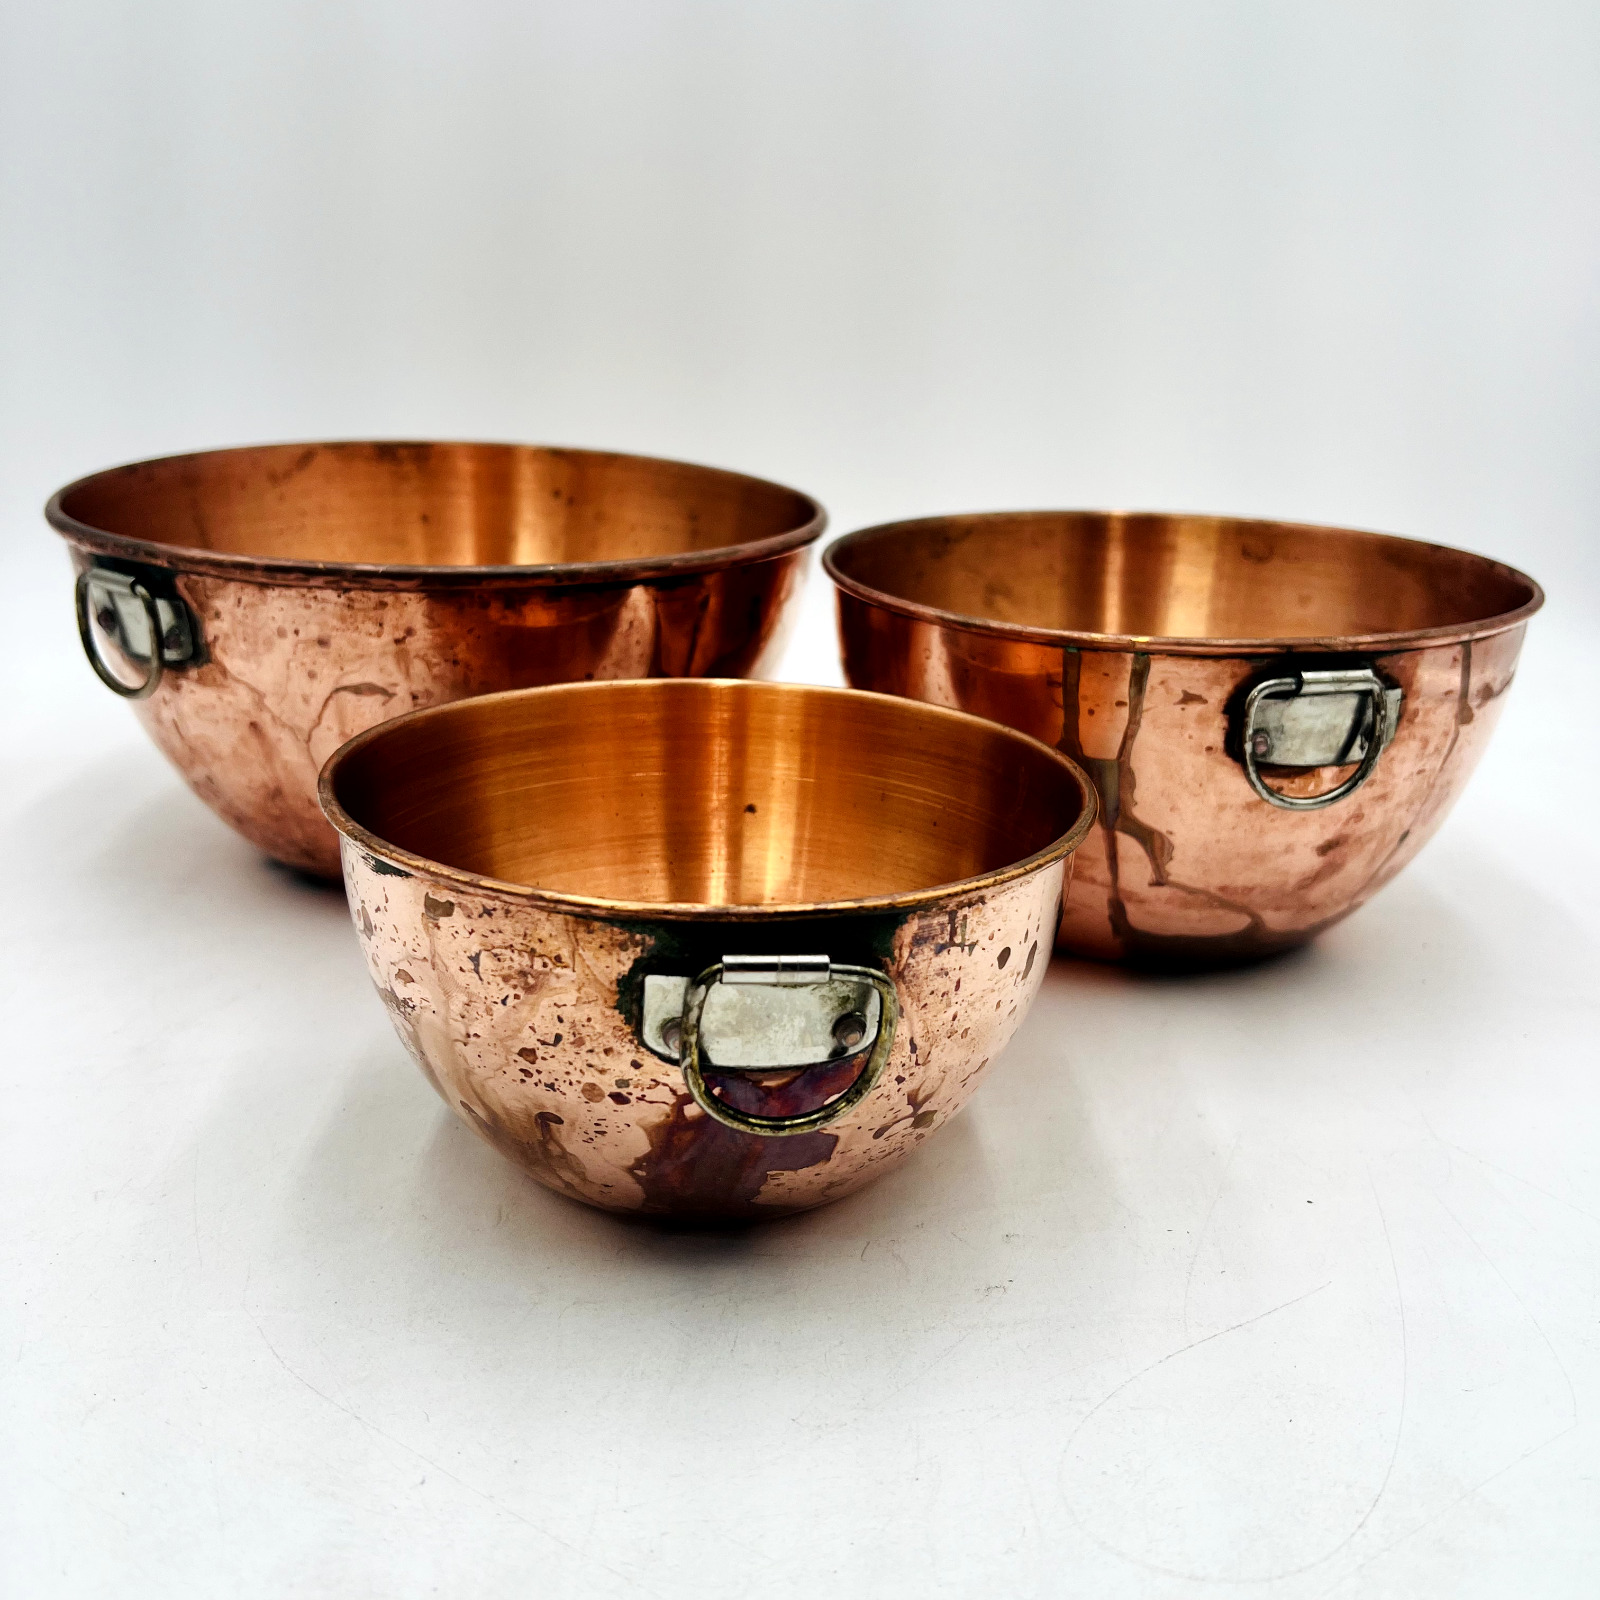 3 Vintage Copper Mixing Nesting Bowls With Brass Ring Handles 8-7-5.5 Inches